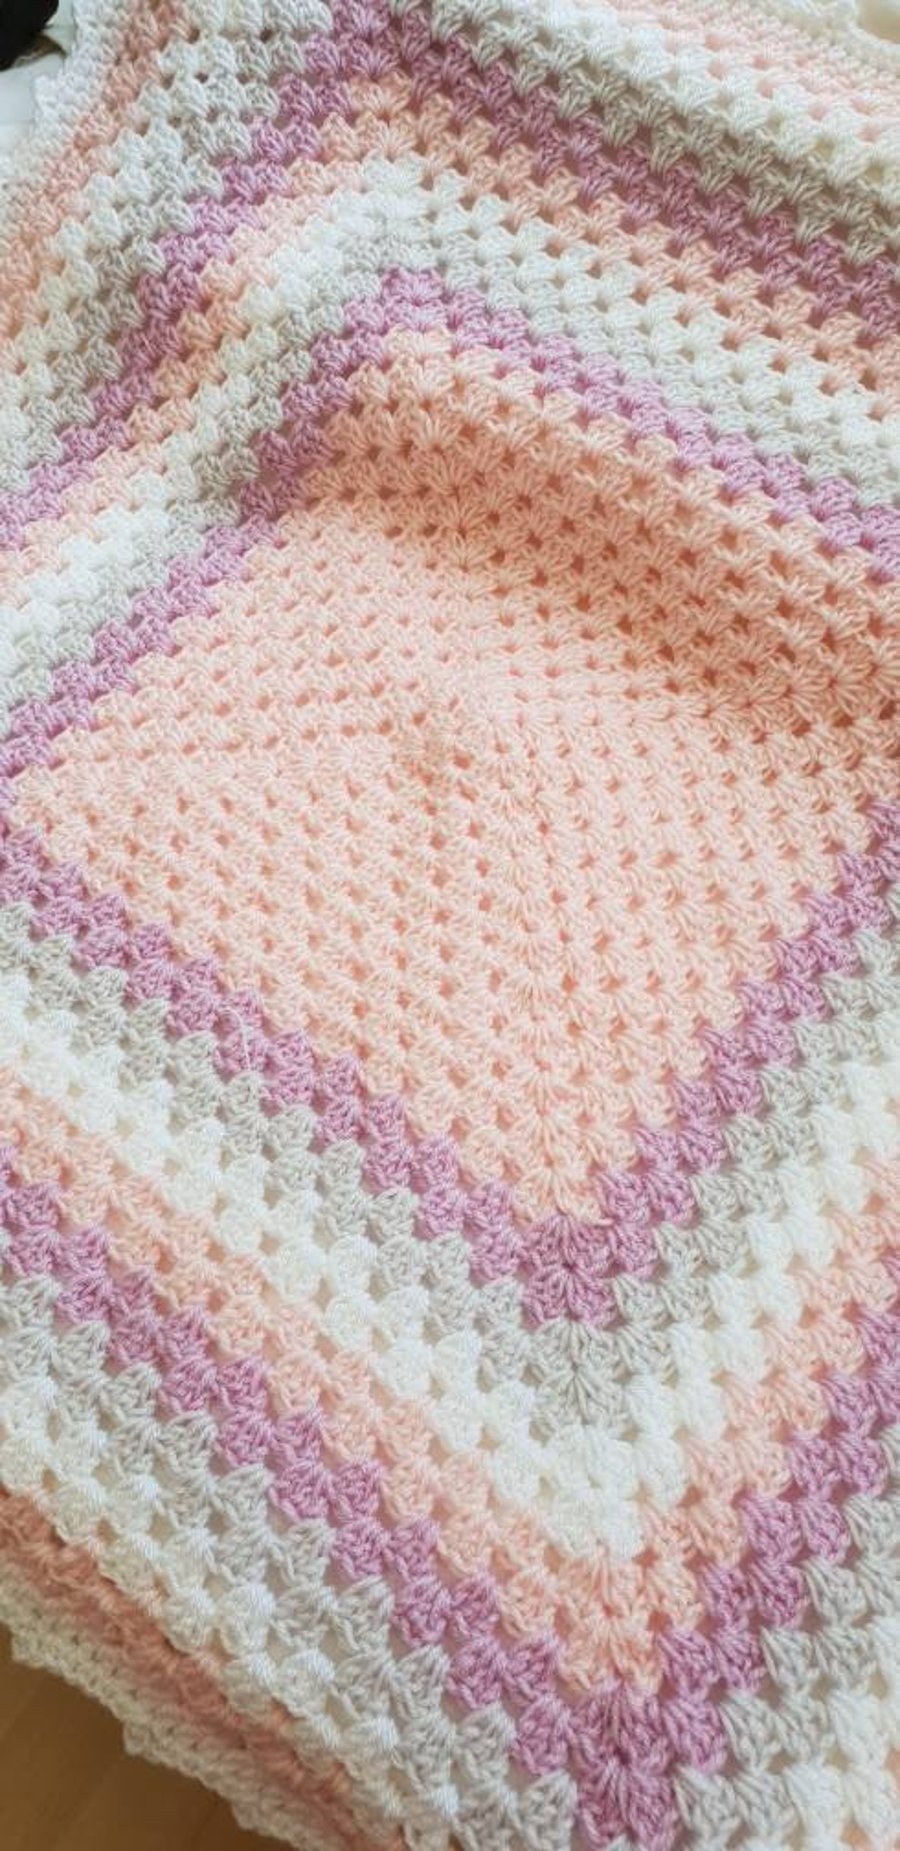 Handmade pink, purple, grey and white granny square baby blanket